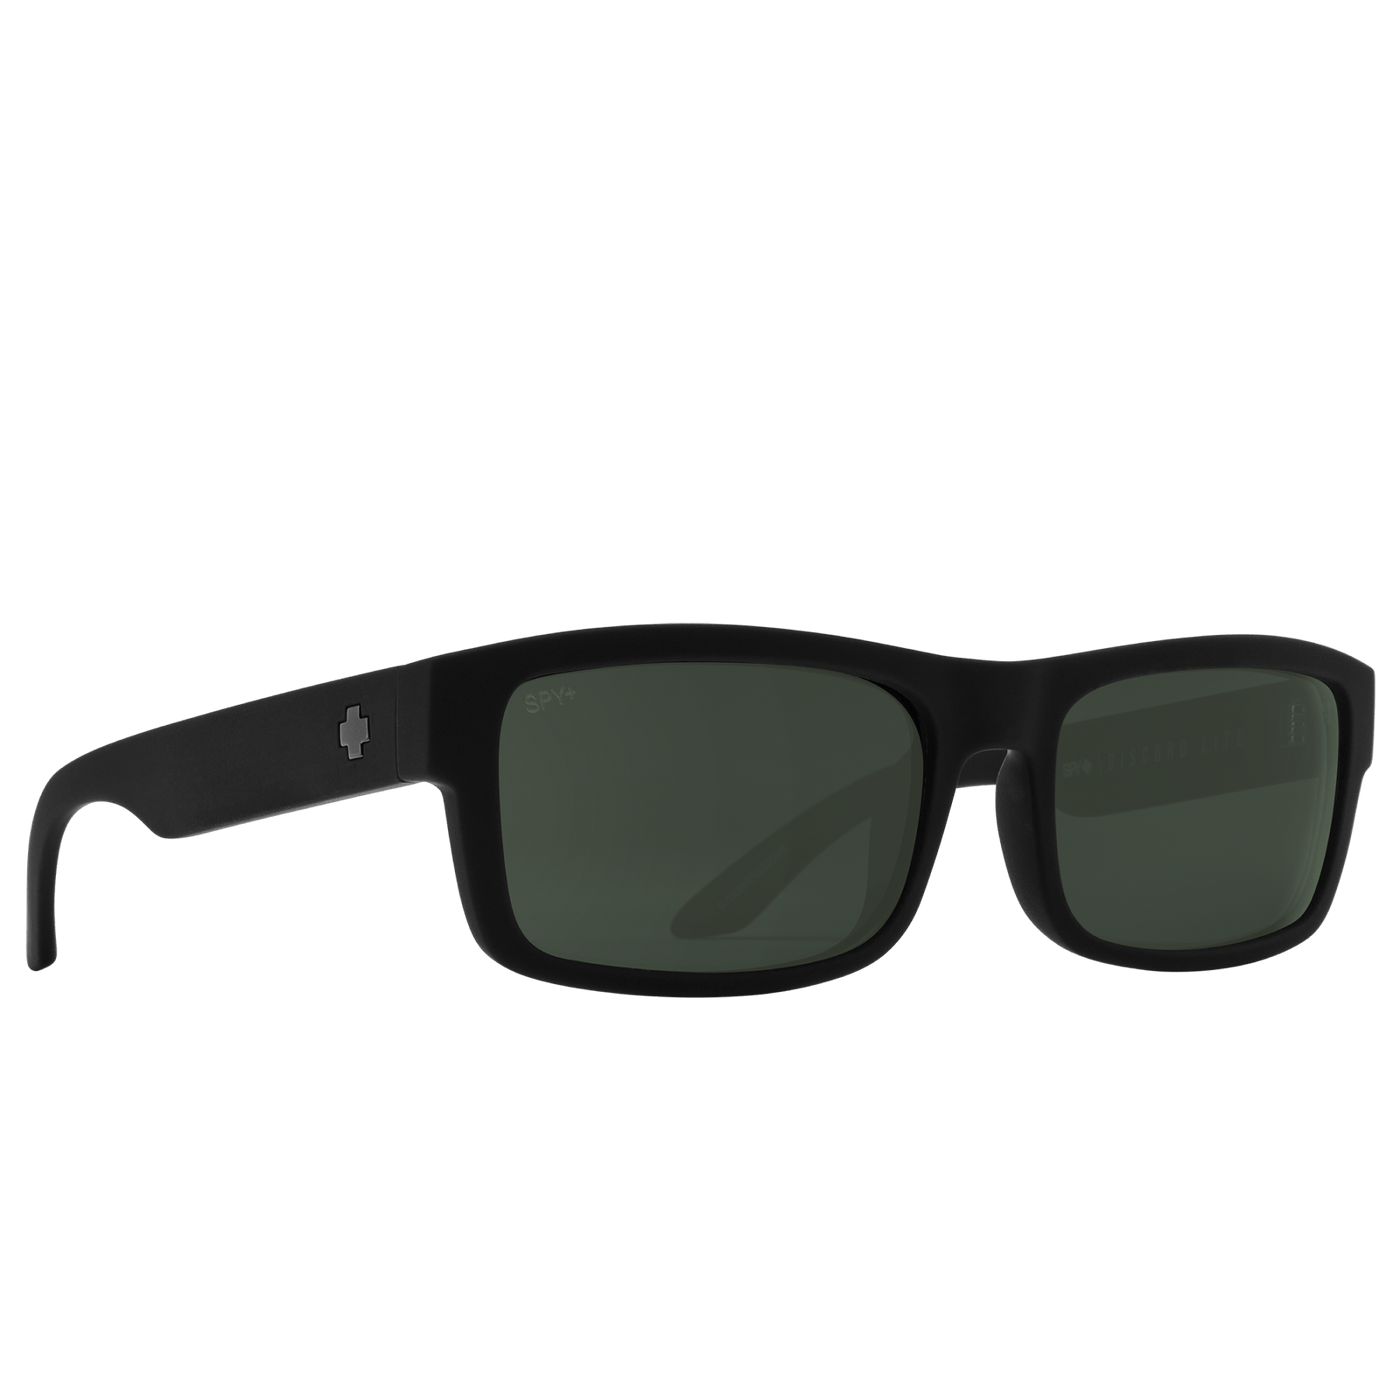 SPY DISCORD LITE Sunglasses, Happy Lens - Gray/Green 8Lines Shop - Fast Shipping